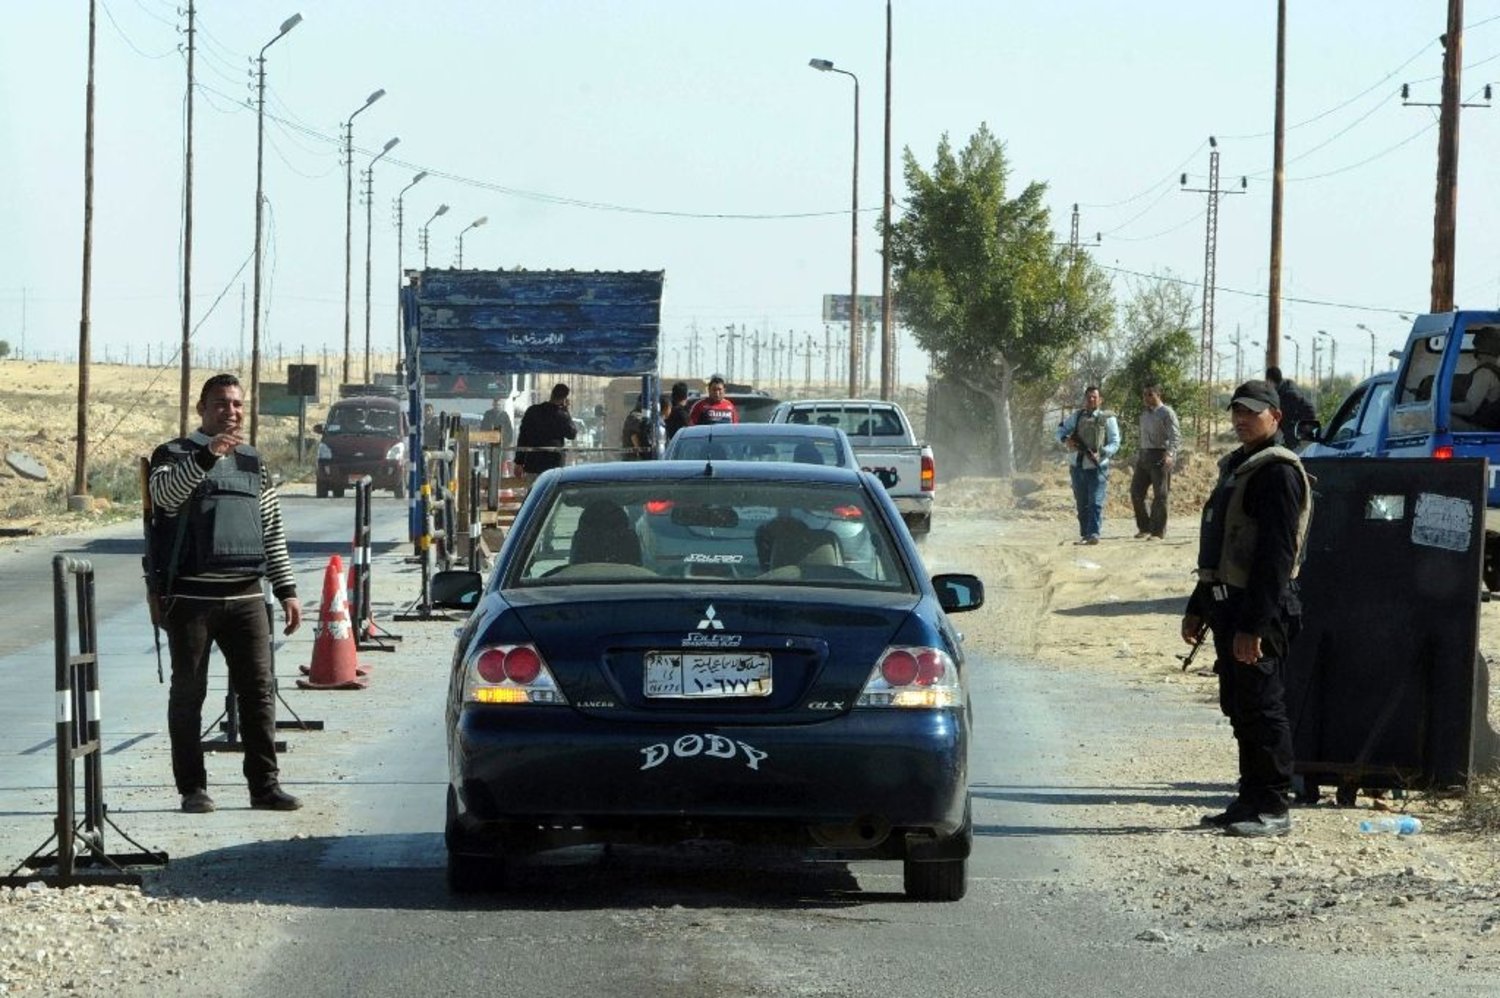 Egyptian police inspect cars at a checkpoint in North Sinai. (AFP)